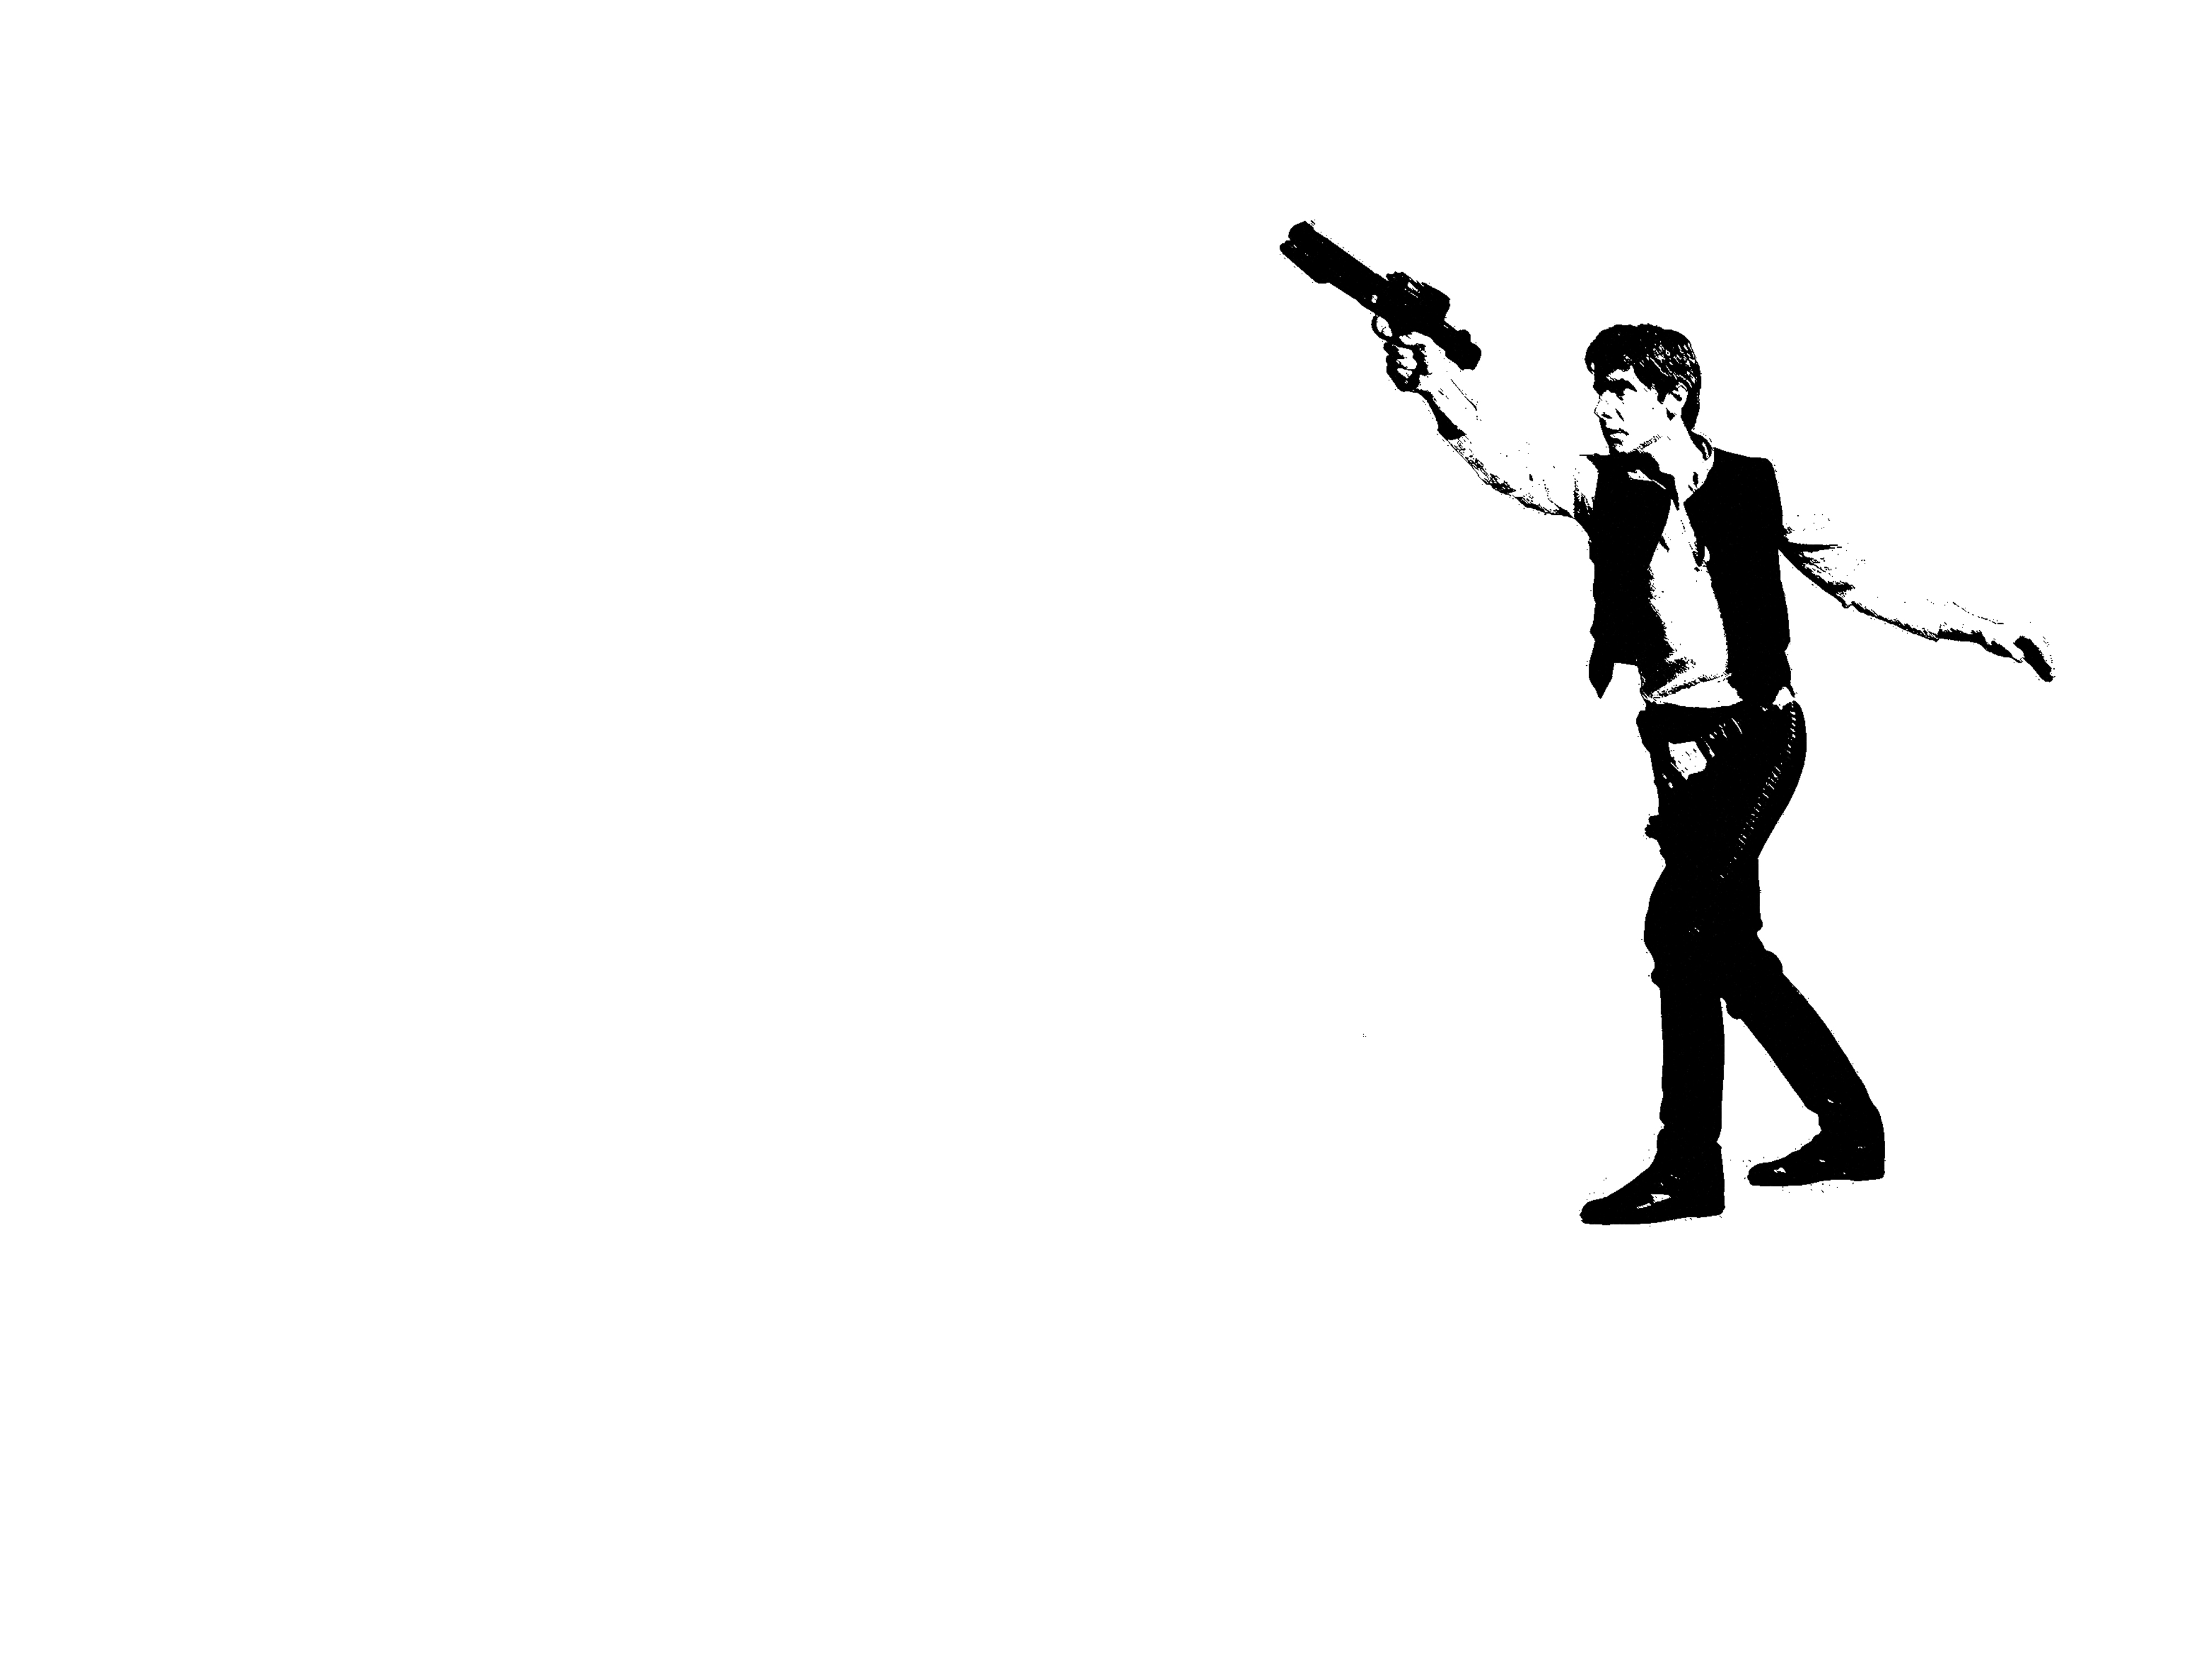 General 4000x3000 Star Wars Star Wars Heroes blaster Han Solo movies Harrison Ford simple background white background